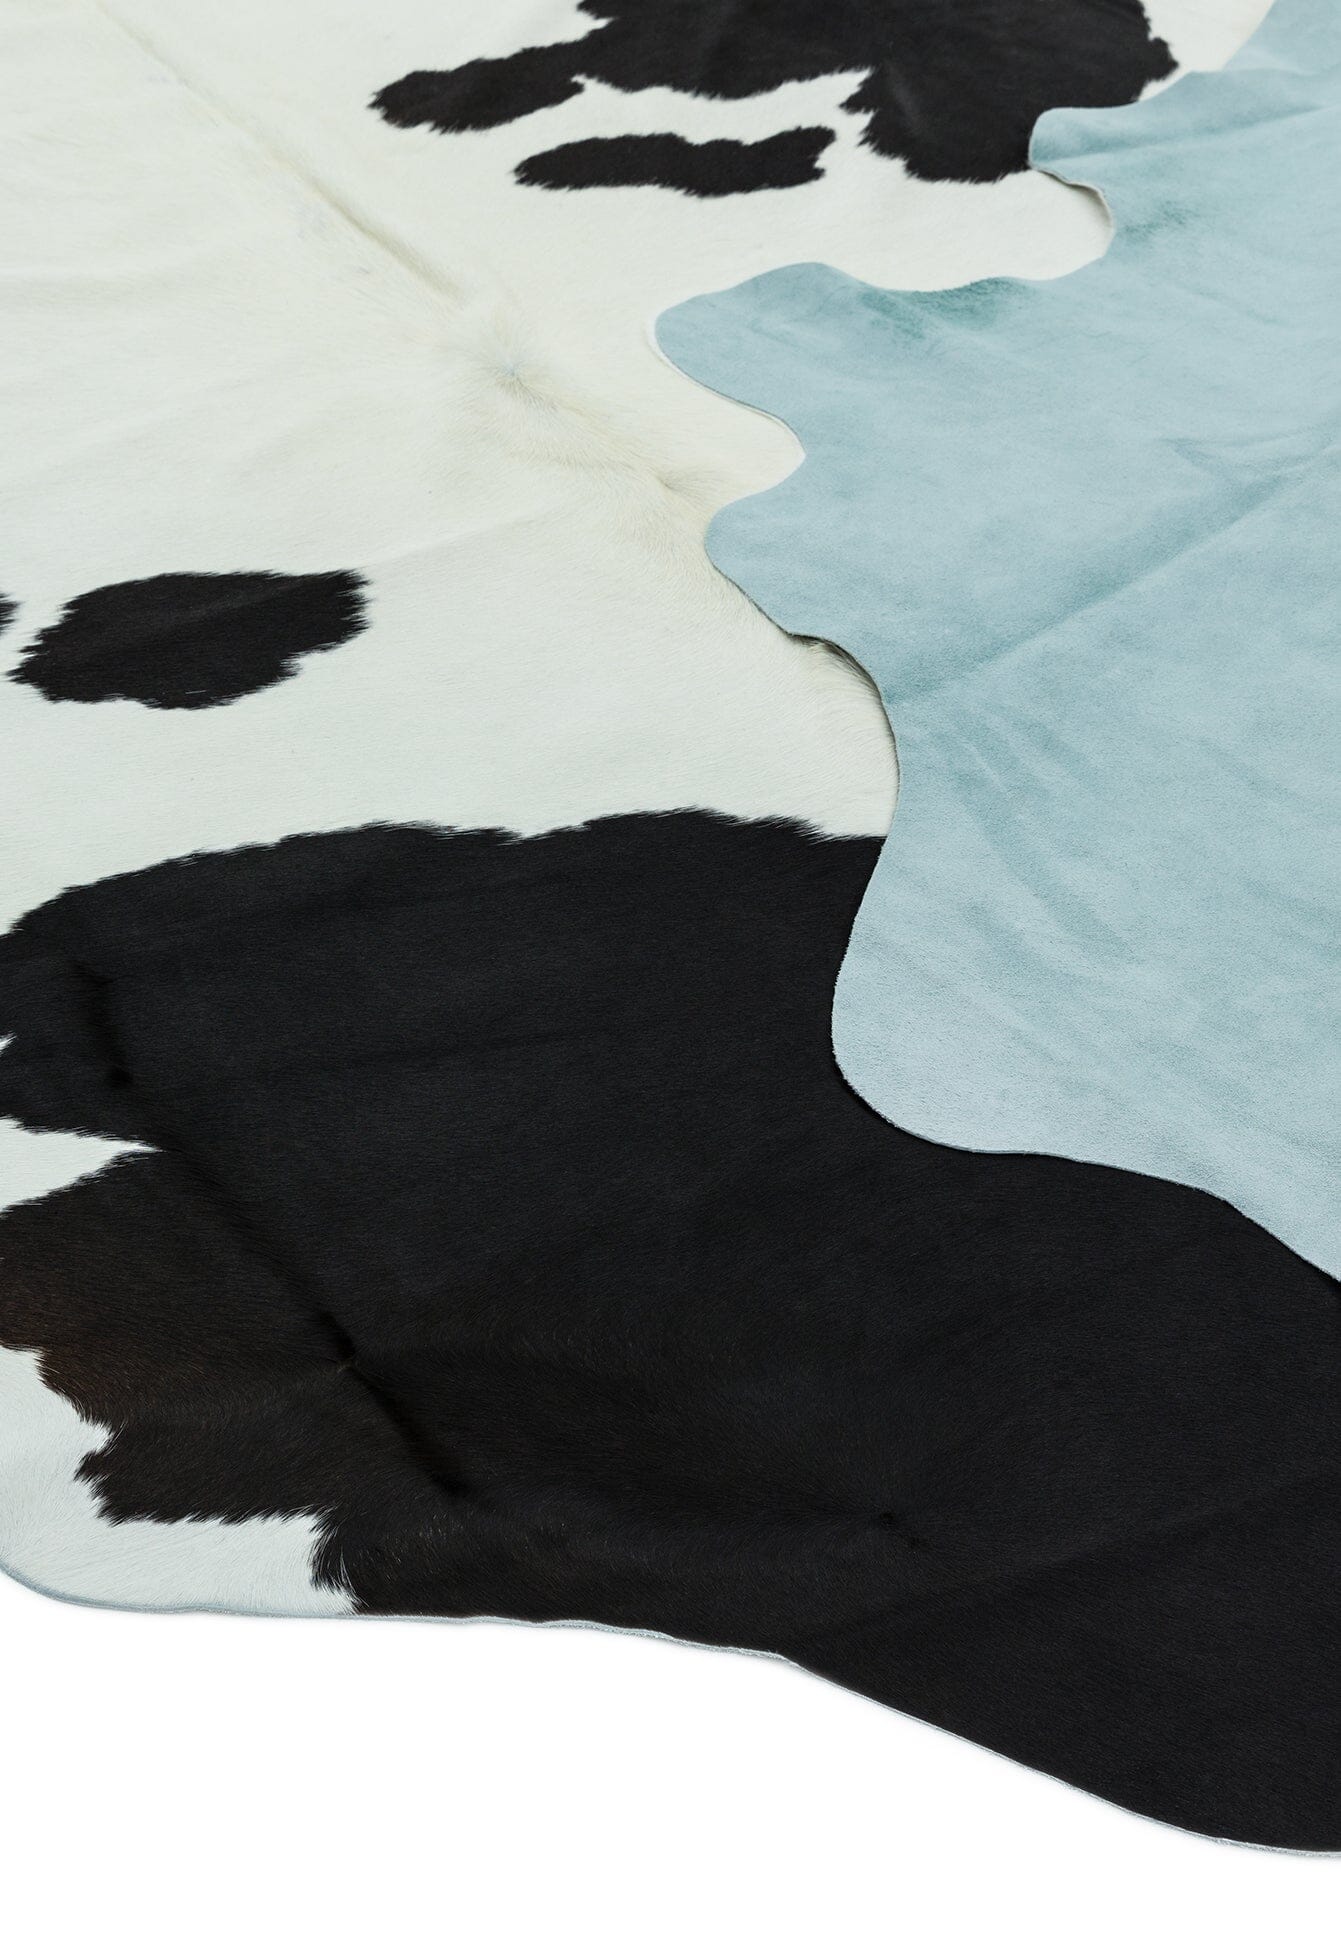  Asiatic Carpets-Asiatic Carpets Rodeo Cowhide Hand Finished Rug Black & White - 100 x 100cm-Black, White 685 